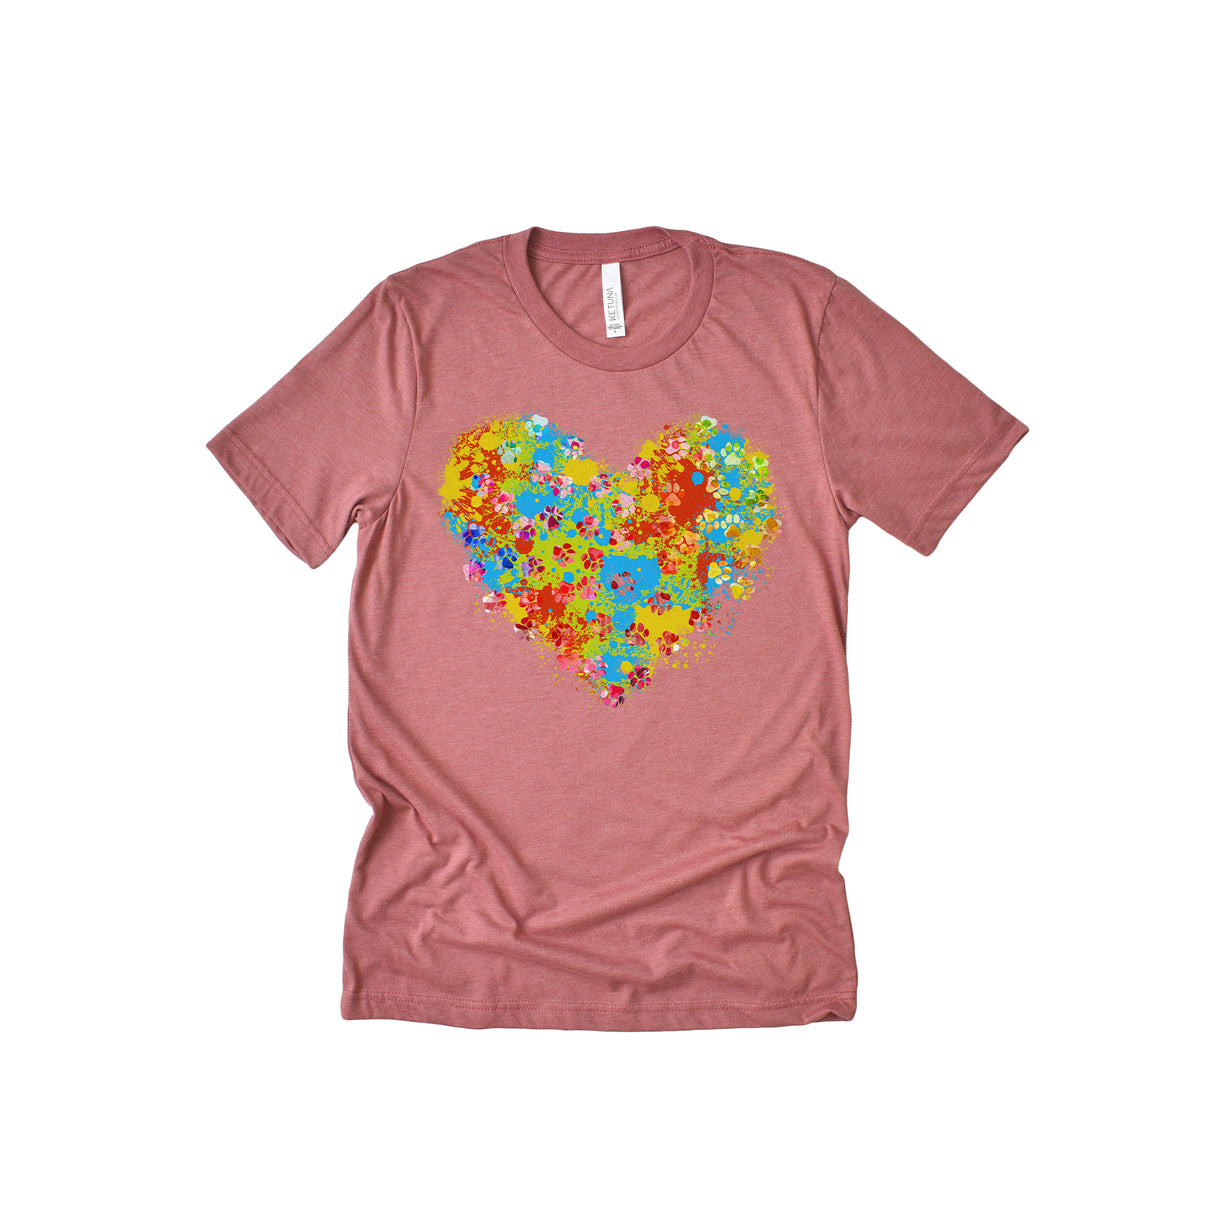 Heart With Paw Prints Adult T-Shirt